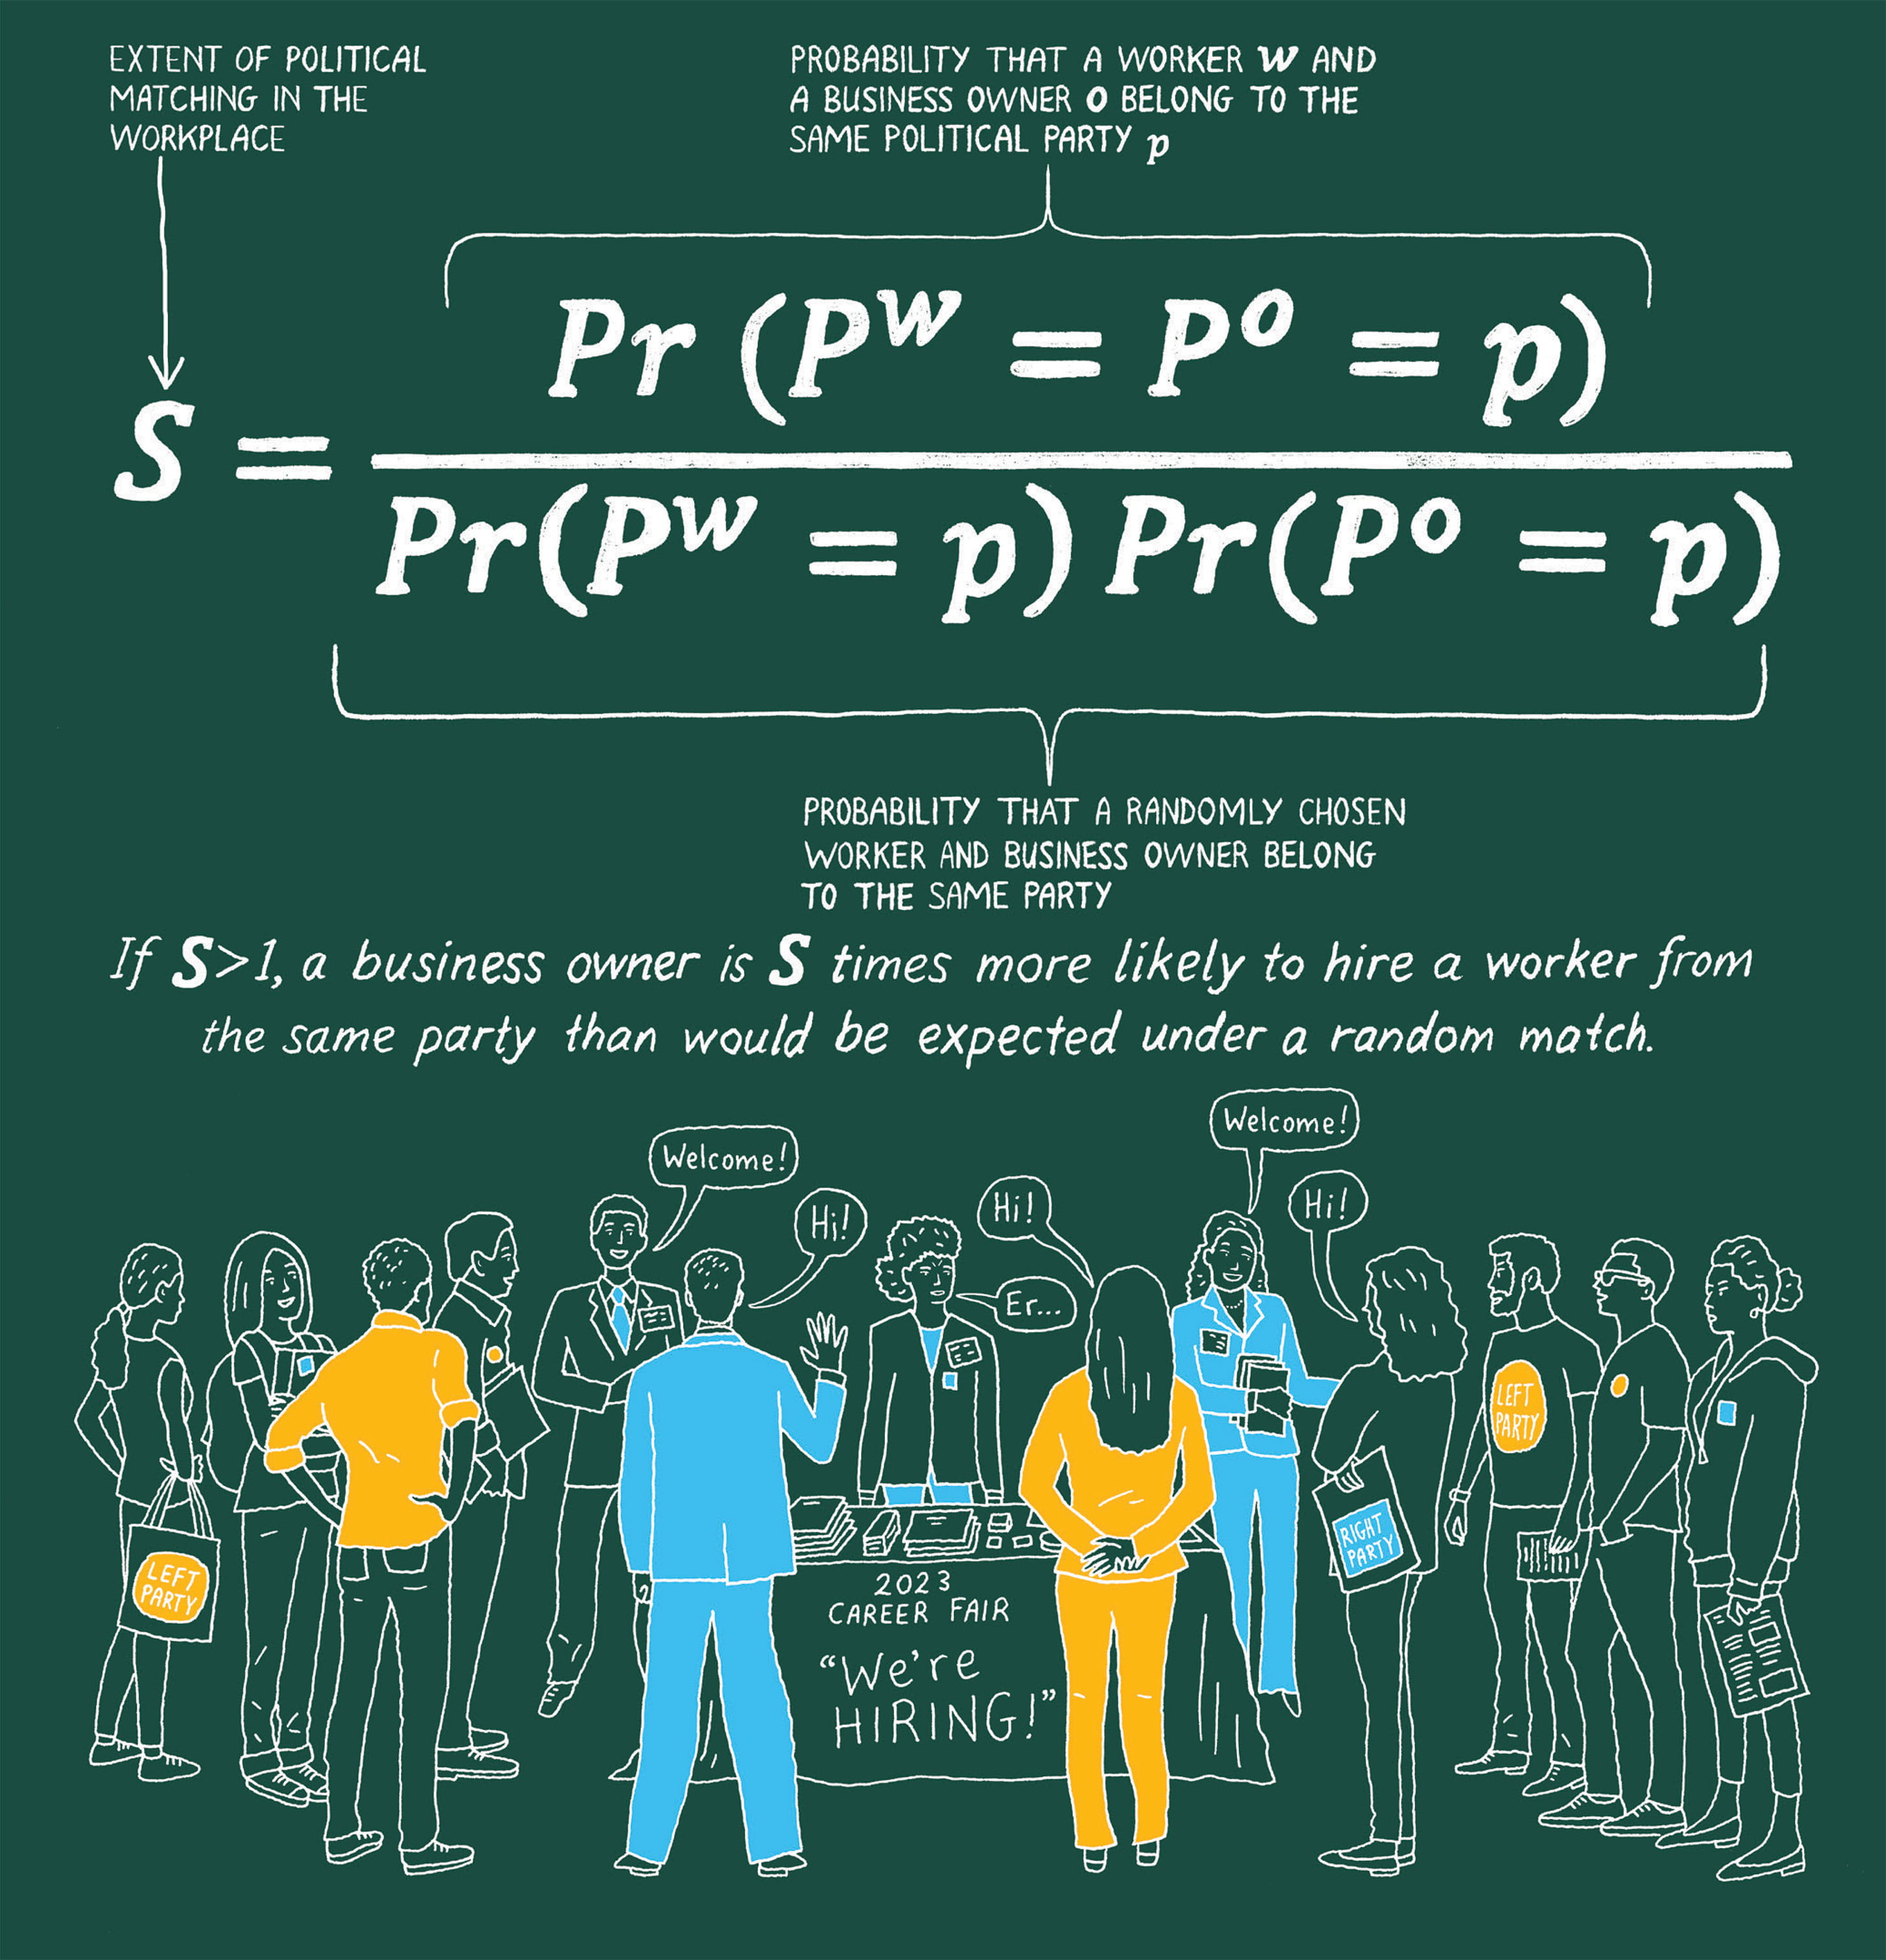 Academic equation for detecting political bias in hiring, with chalkboard-style illustration of people at a career fair